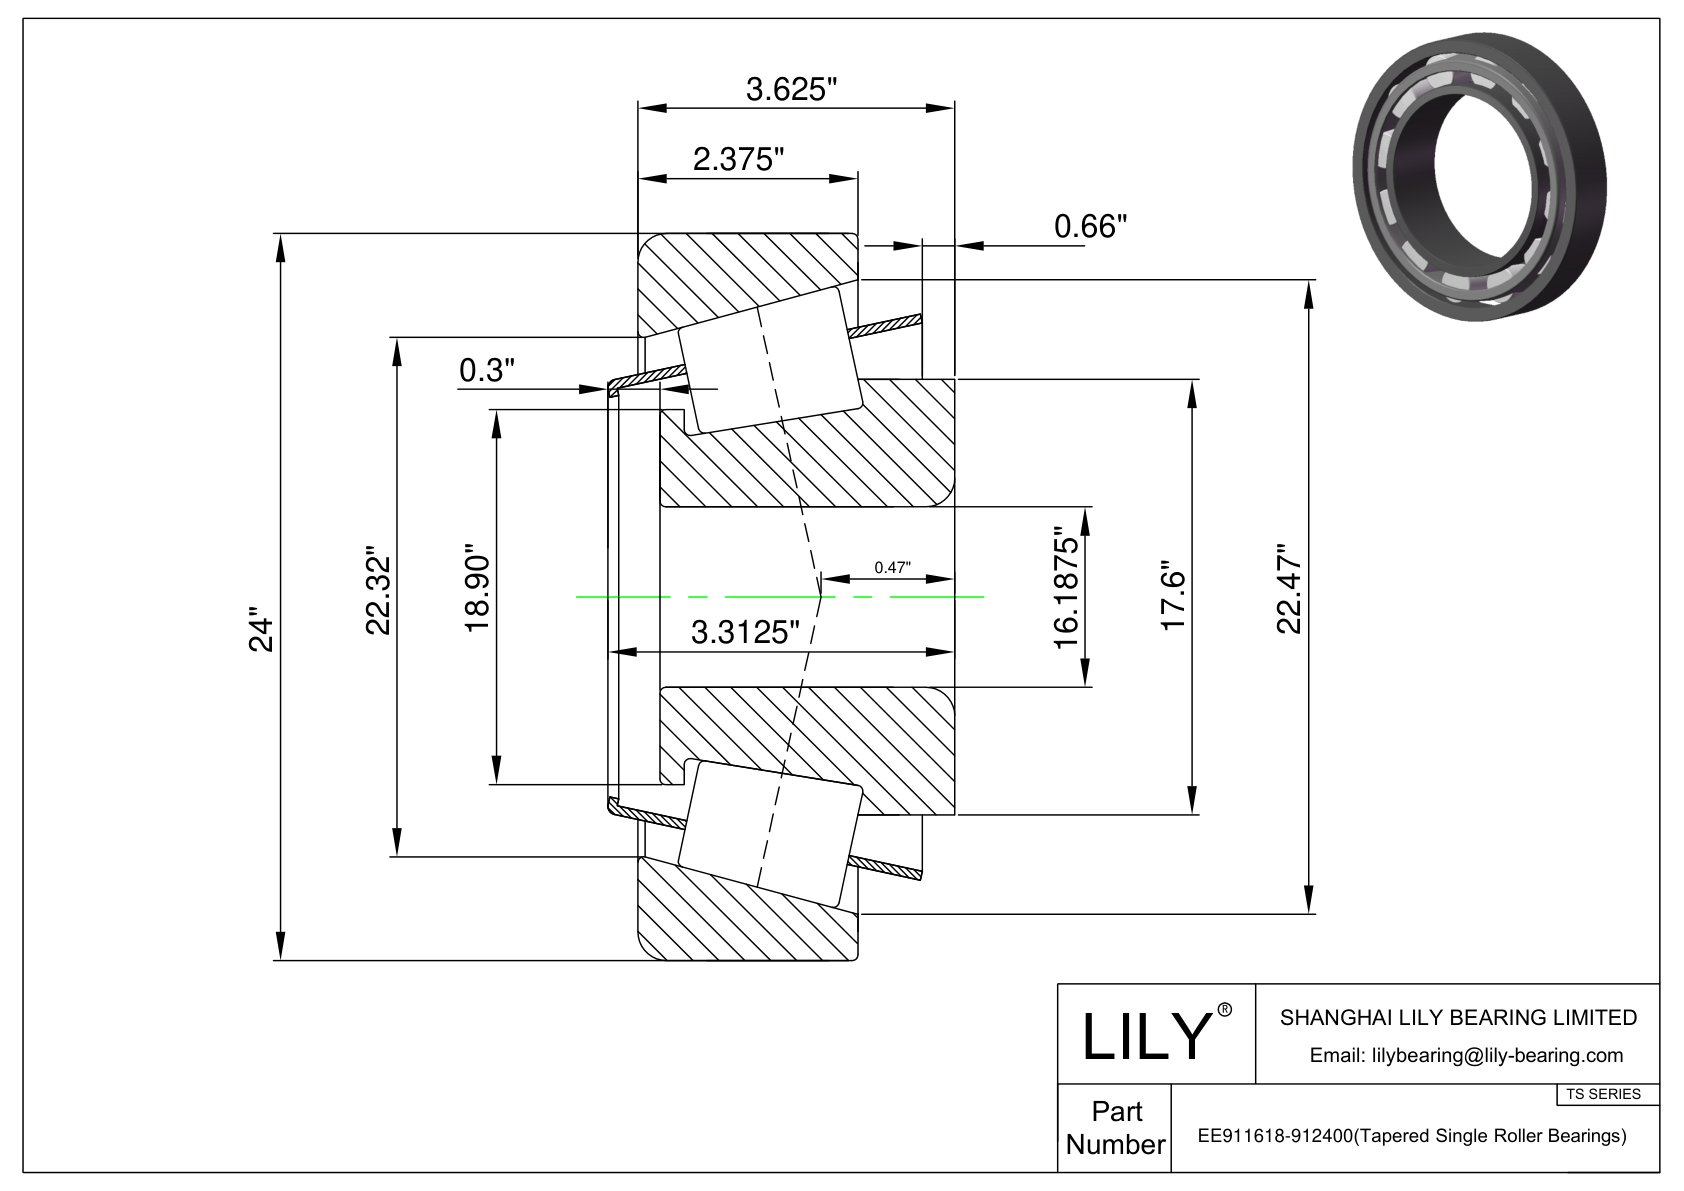 EE911618-912400 TS (Tapered Single Roller Bearings) (Imperial) cad drawing